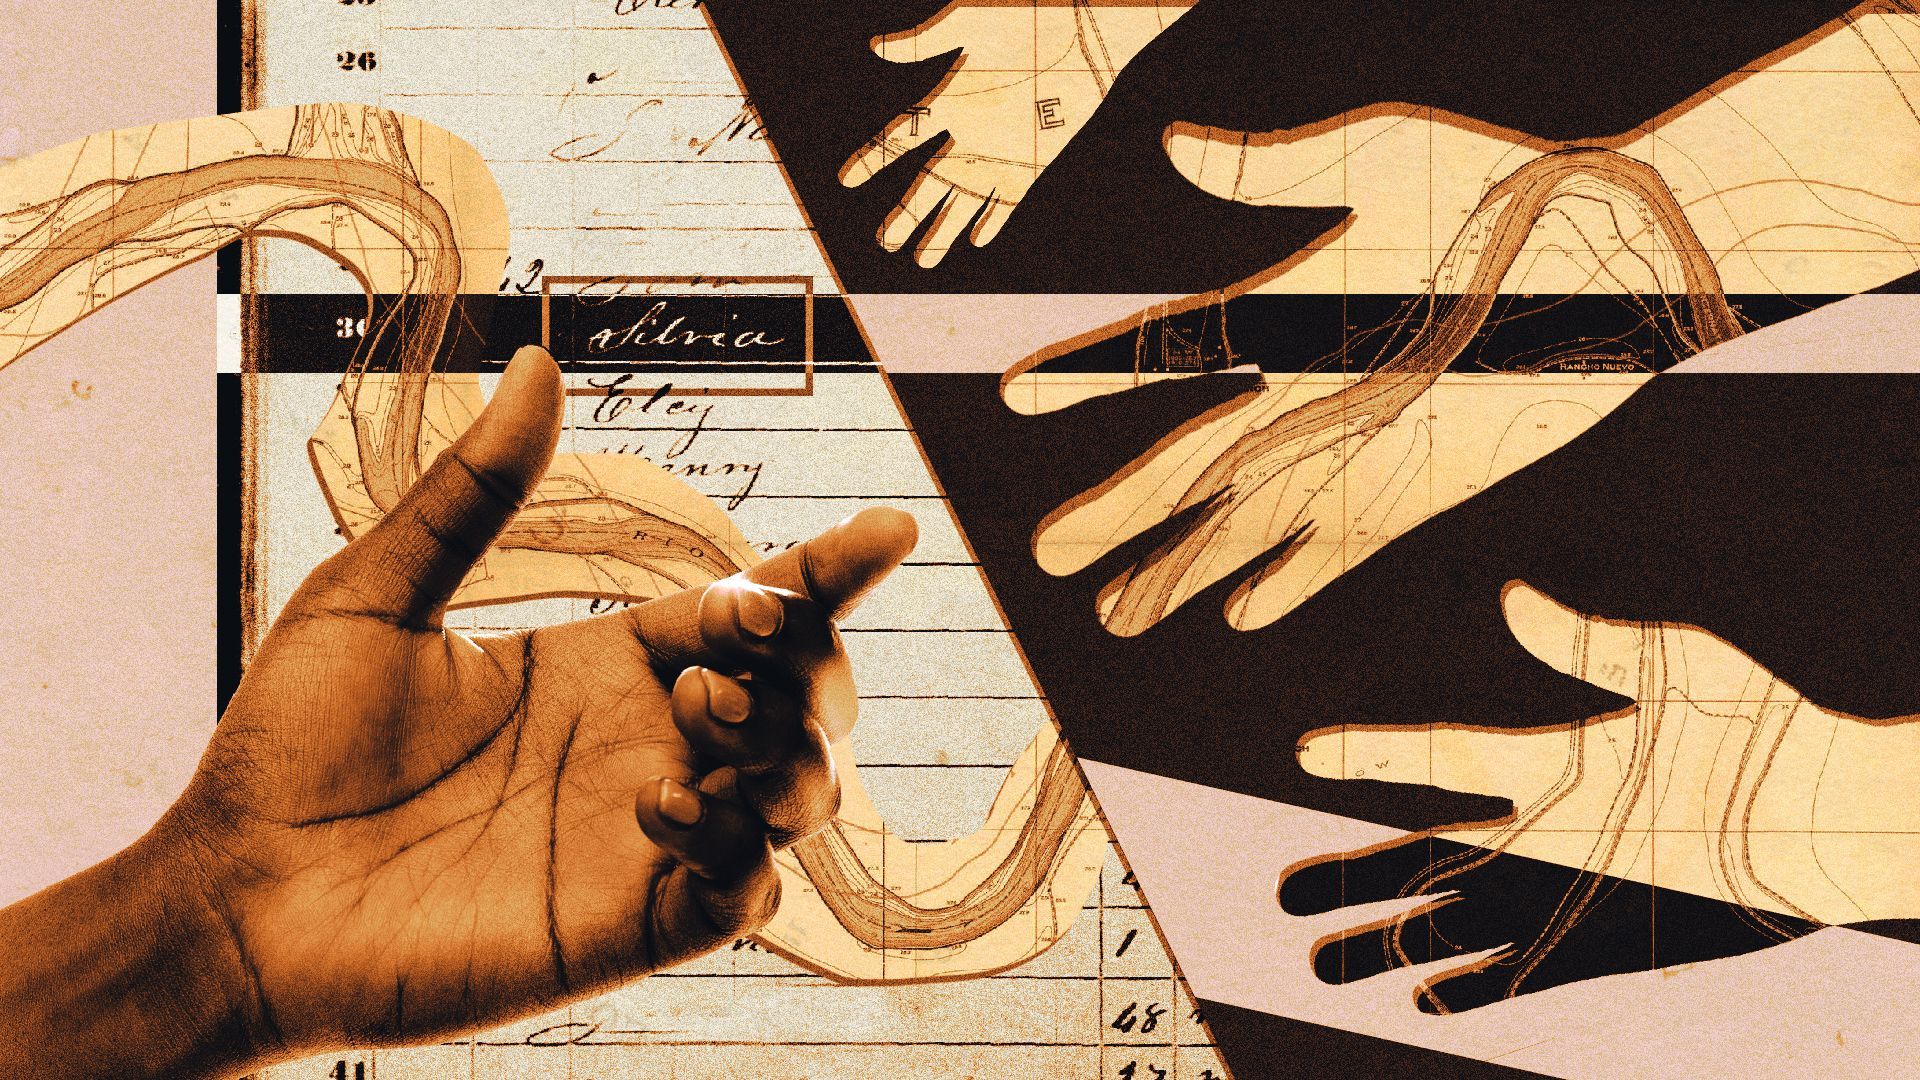 Photo illustration of a Black person's hand reaching towards silhouettes of hands, across a map of the Rio Grande and a ledger with the name "Silvia" highlighted.